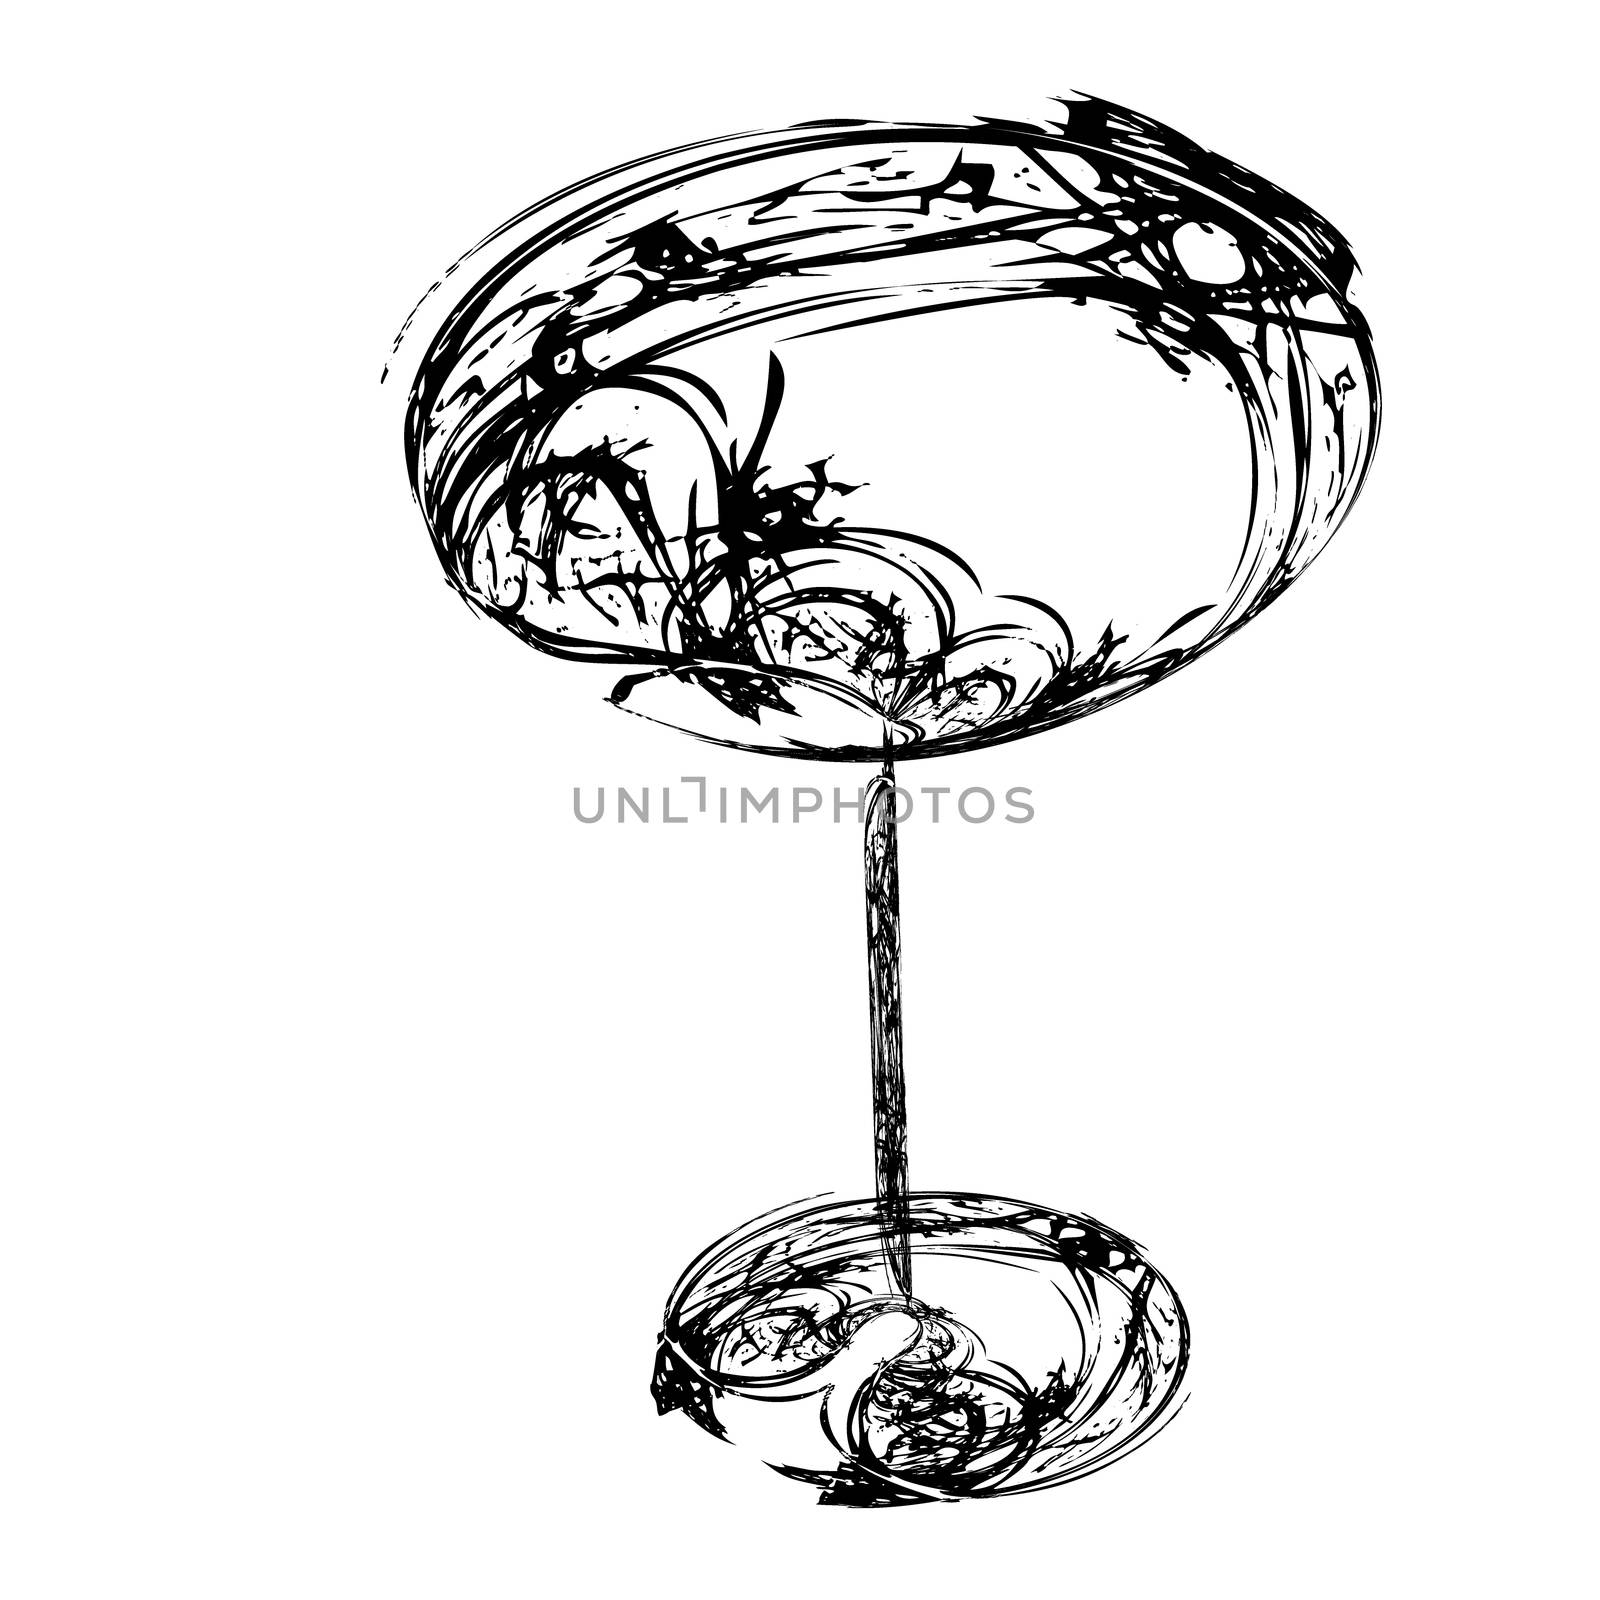 The stylized wine glass for fault  by H2Oshka